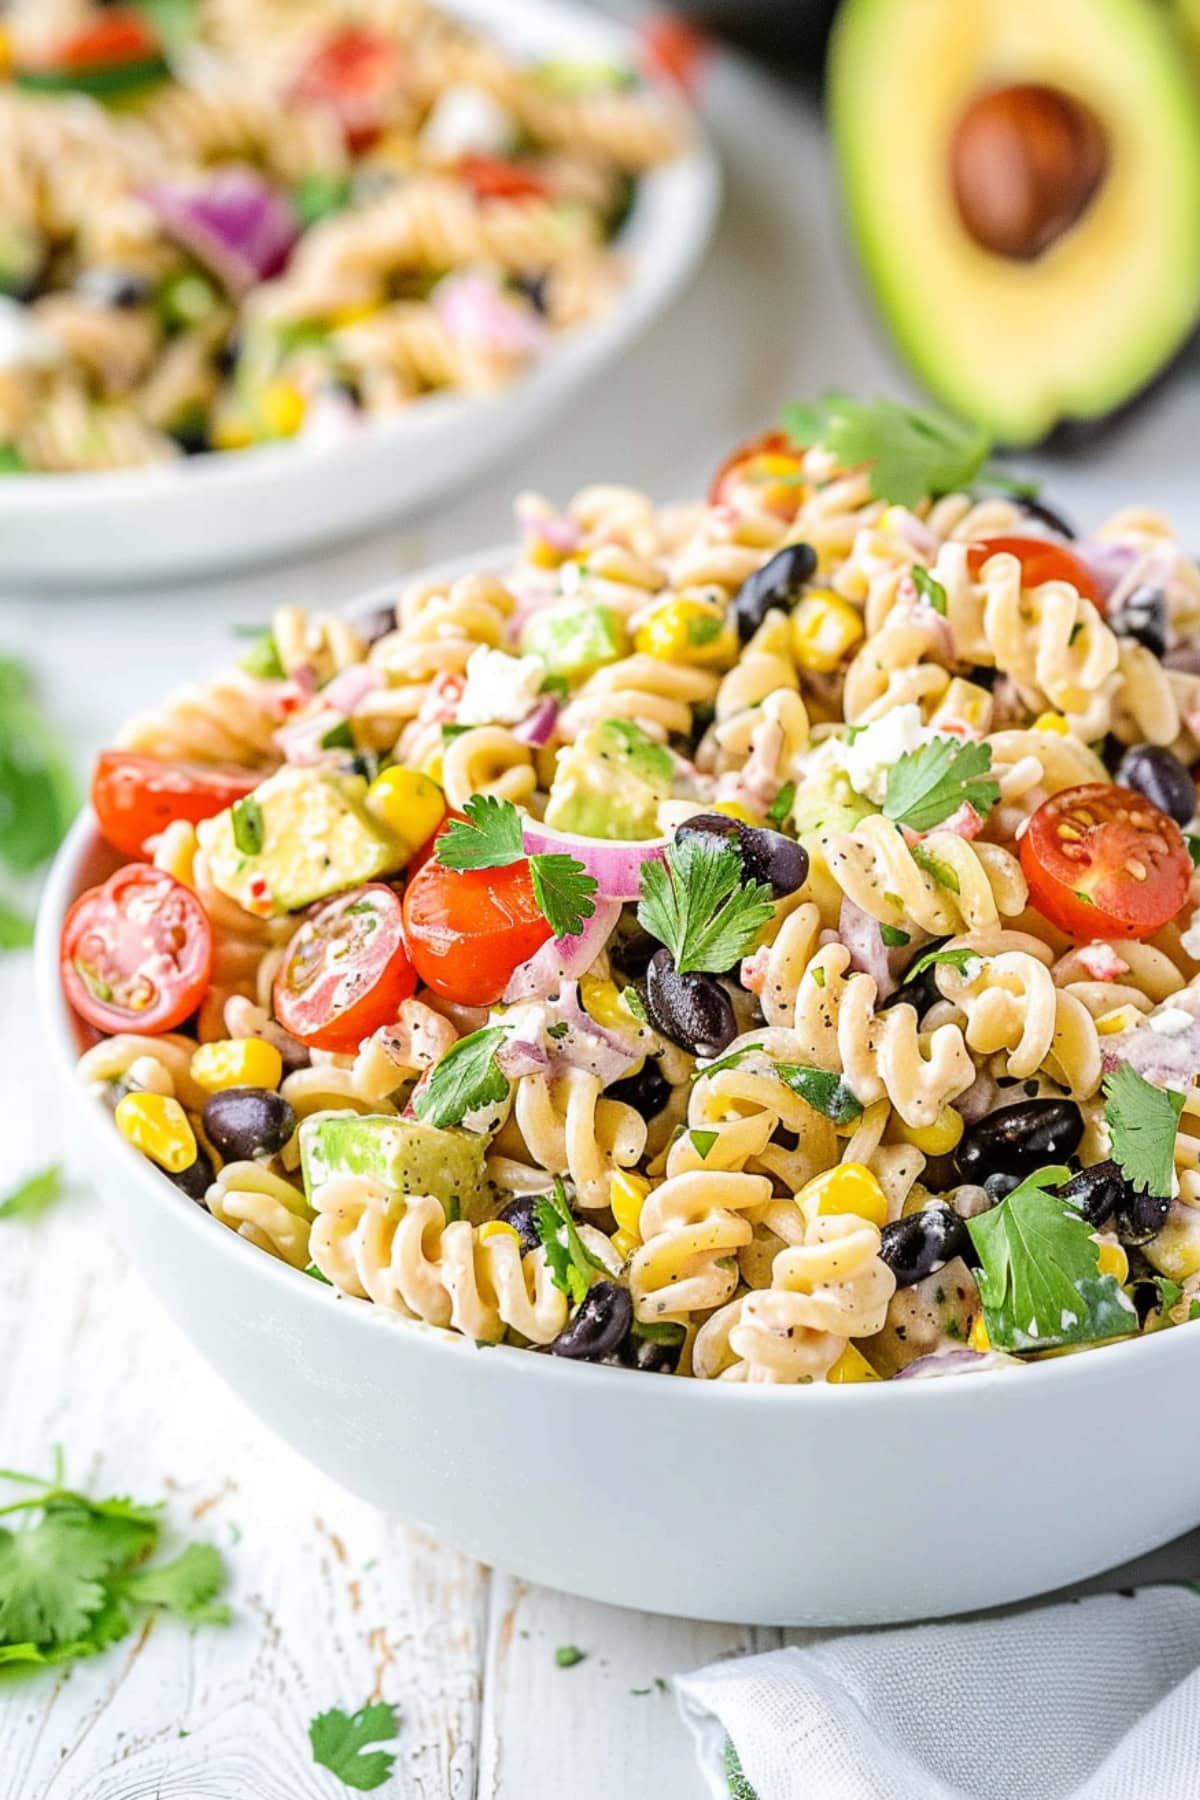 Southwest pasta salad made with rotini pasta, black beans, corn kernels, red bell pepper diced, diced red onion, cherry tomatoes, jalapeno pepper minced, fresh cilantro chopped, avocado diced, crumbled feta cheese coated in a creamy white dressing served on a white bowl.